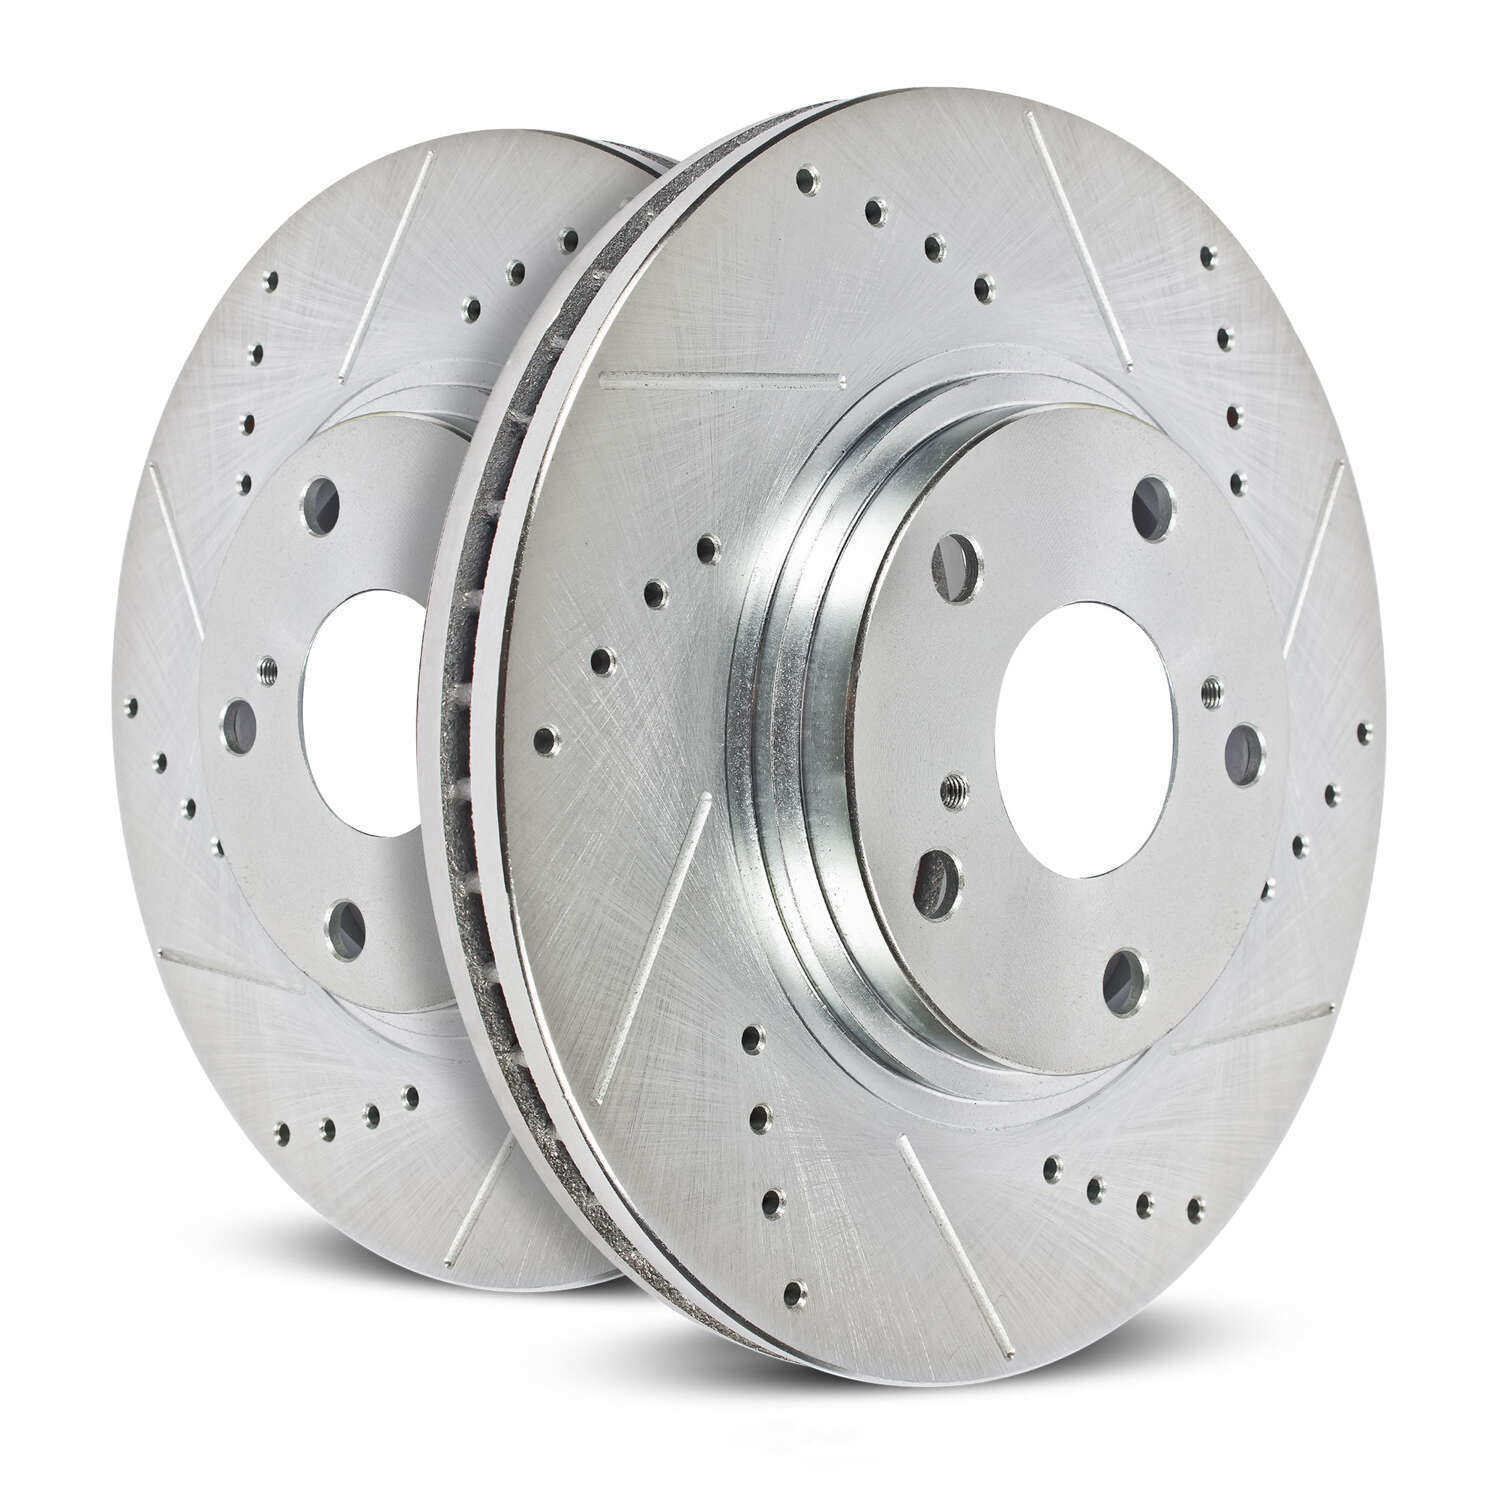 POWER STOP XPR - Power Stop - Rear Drilled, Slotted and Zinc Plated Brake Rotor Pair - Co - PWX JBR1362XPR